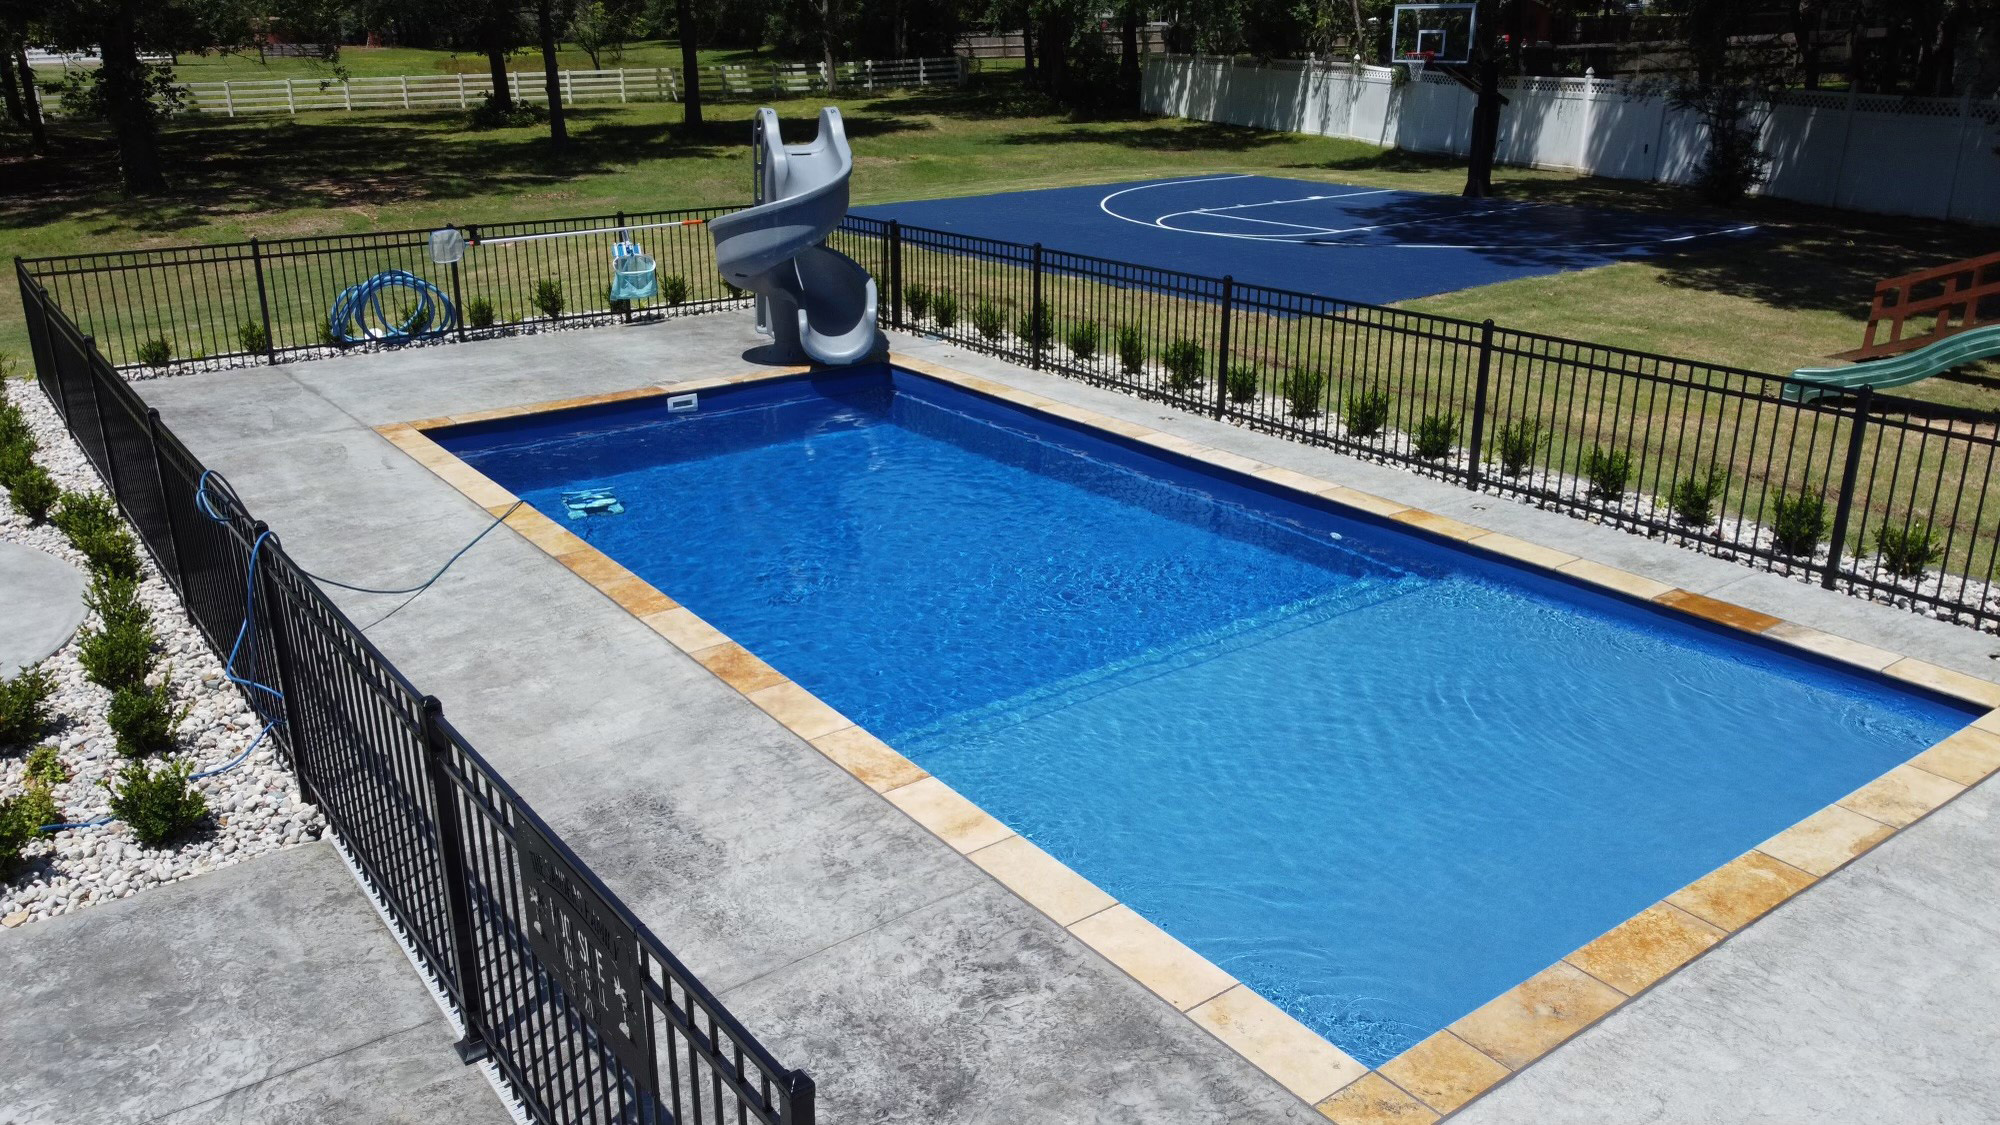 Lonestar Inground Fiberglass Pools Marion TX for a private backyard Oasis for wholesome family enjoyment, exercise, and association